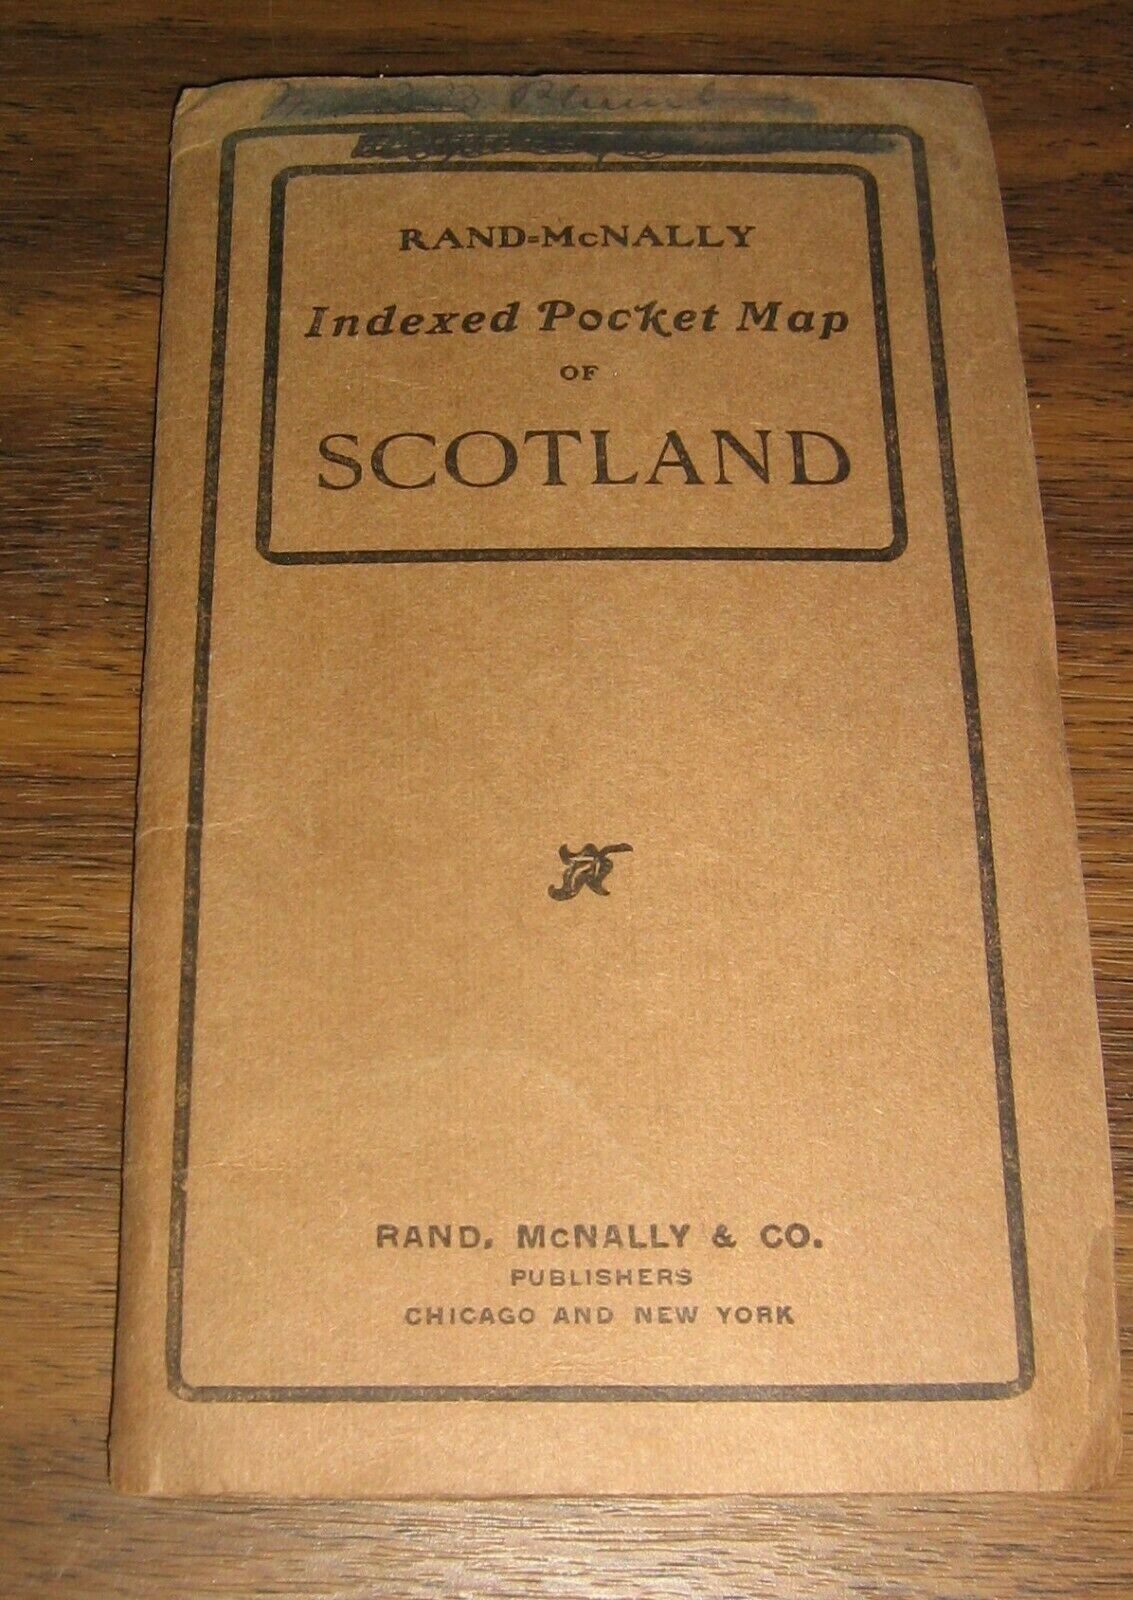 Vintage 1906 Scotland Rand McNally Indexed Pocket Map,Railroad System,Cities